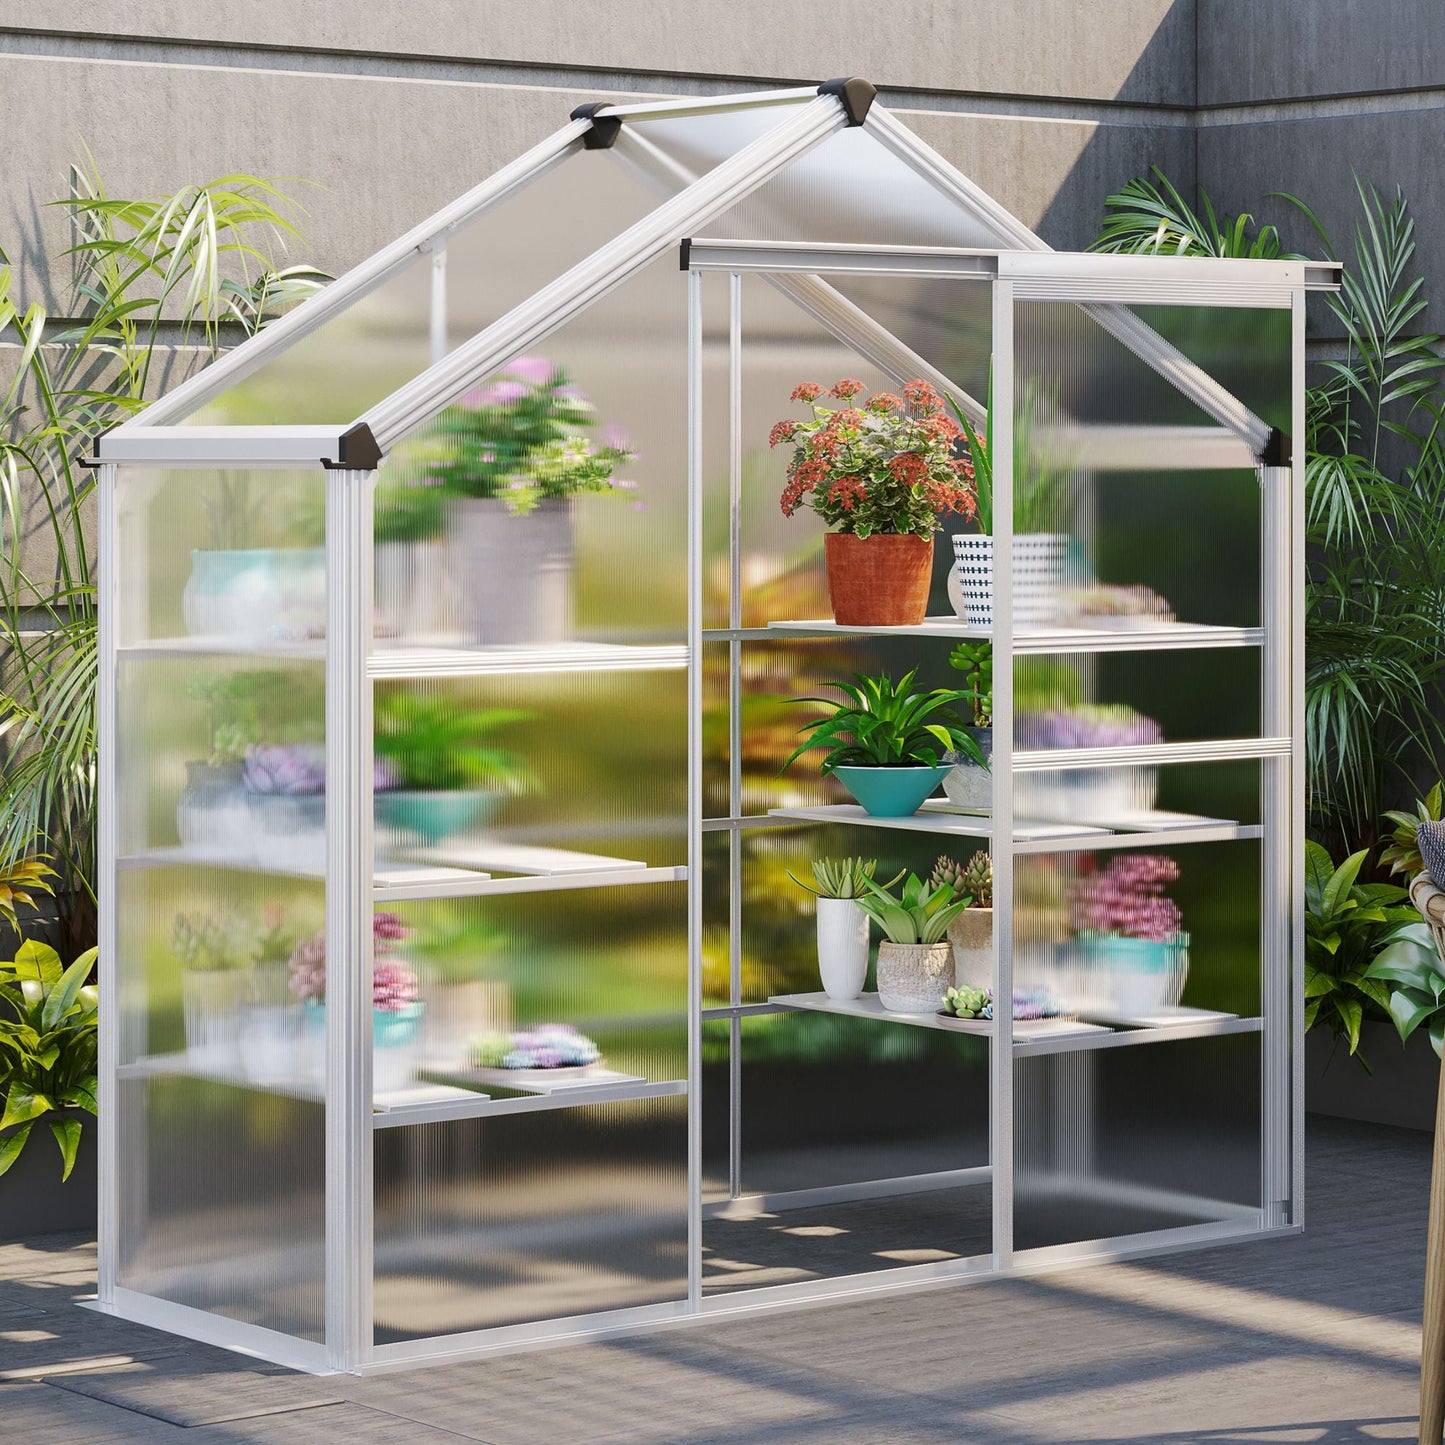 6.3' x 2.3' x 6.1' Outdoor Walk-in Greenhouse with 3-Tier Shelves, Garden Polycarbonate Green House Plants Flower Cold Frame with Aluminum Frame at Gallery Canada